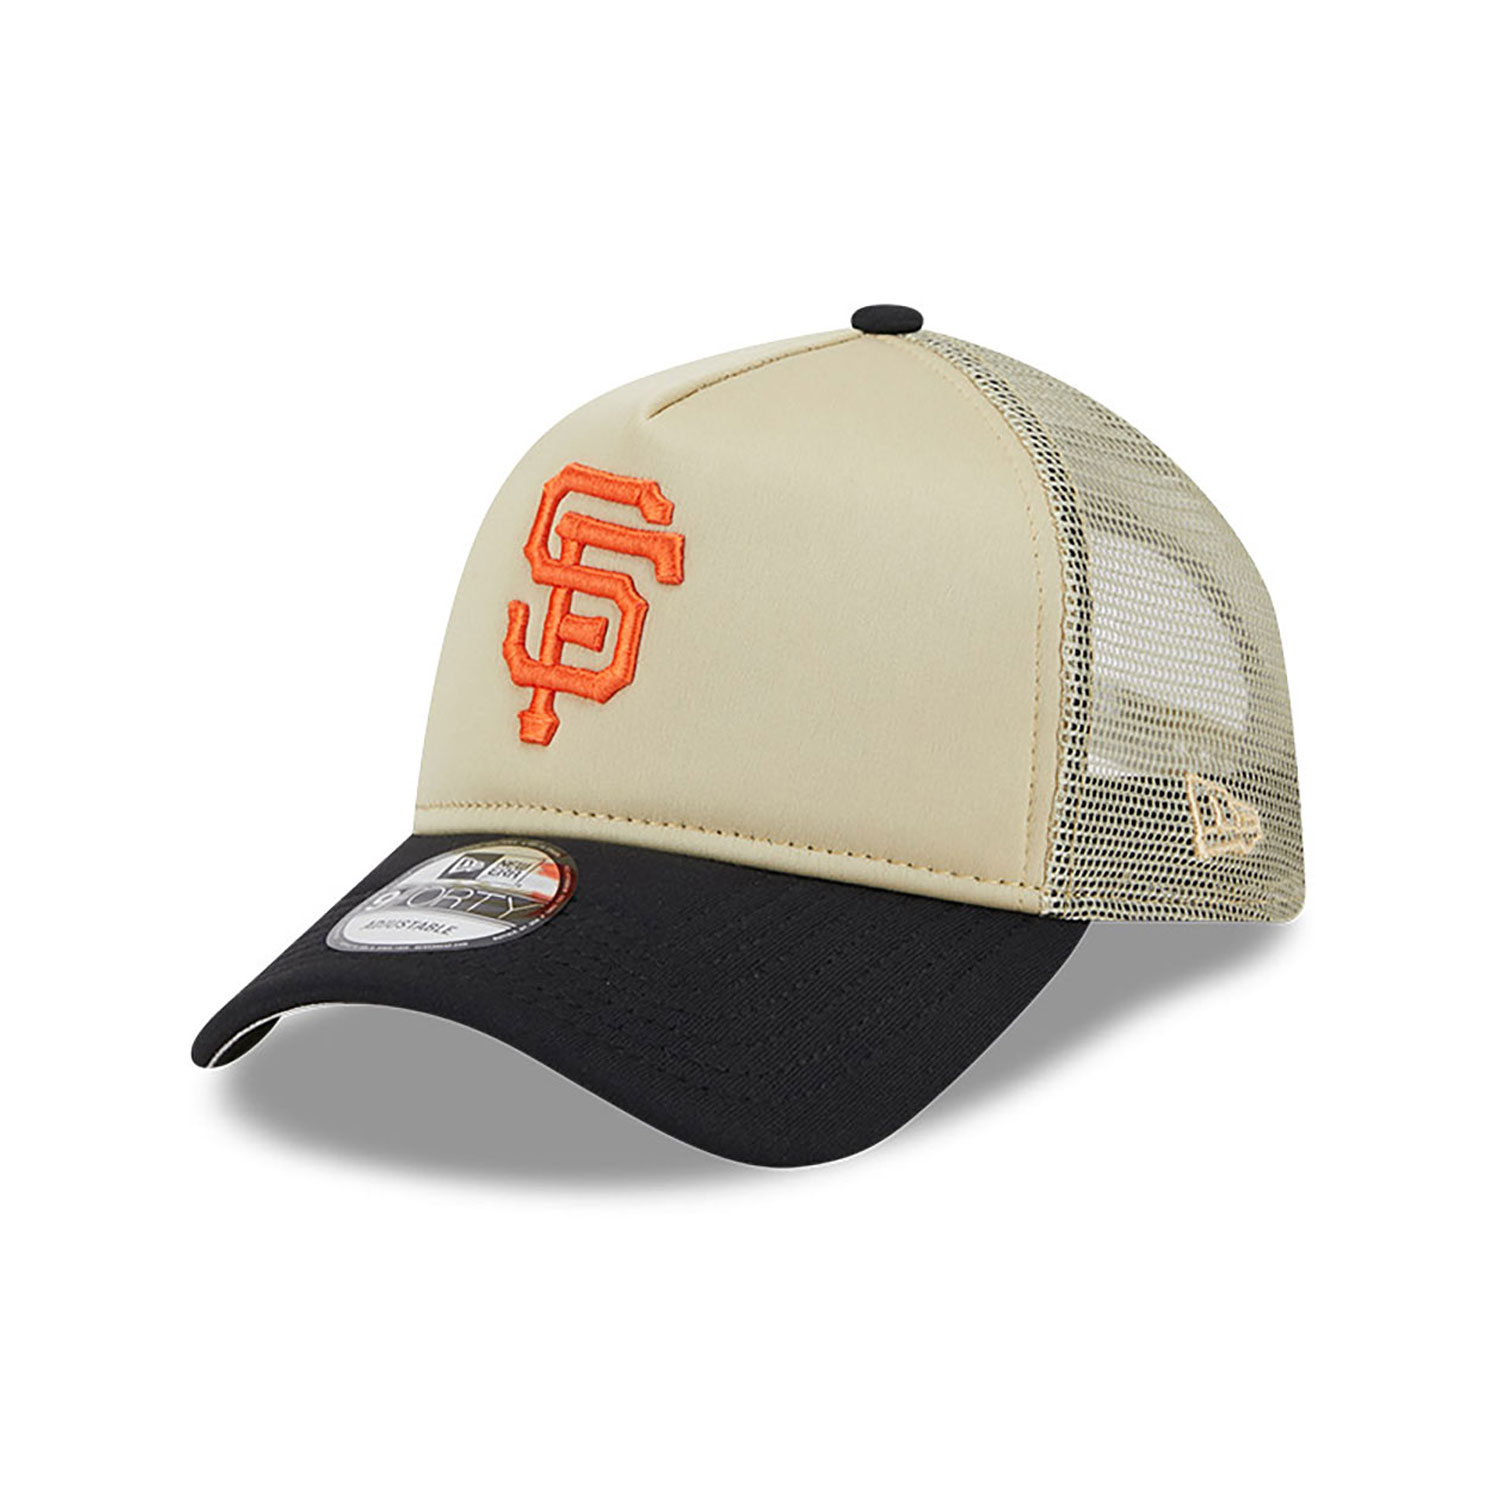 San Francisco Giants All Day Beige 9FORTY A-Frame Trucker Cap